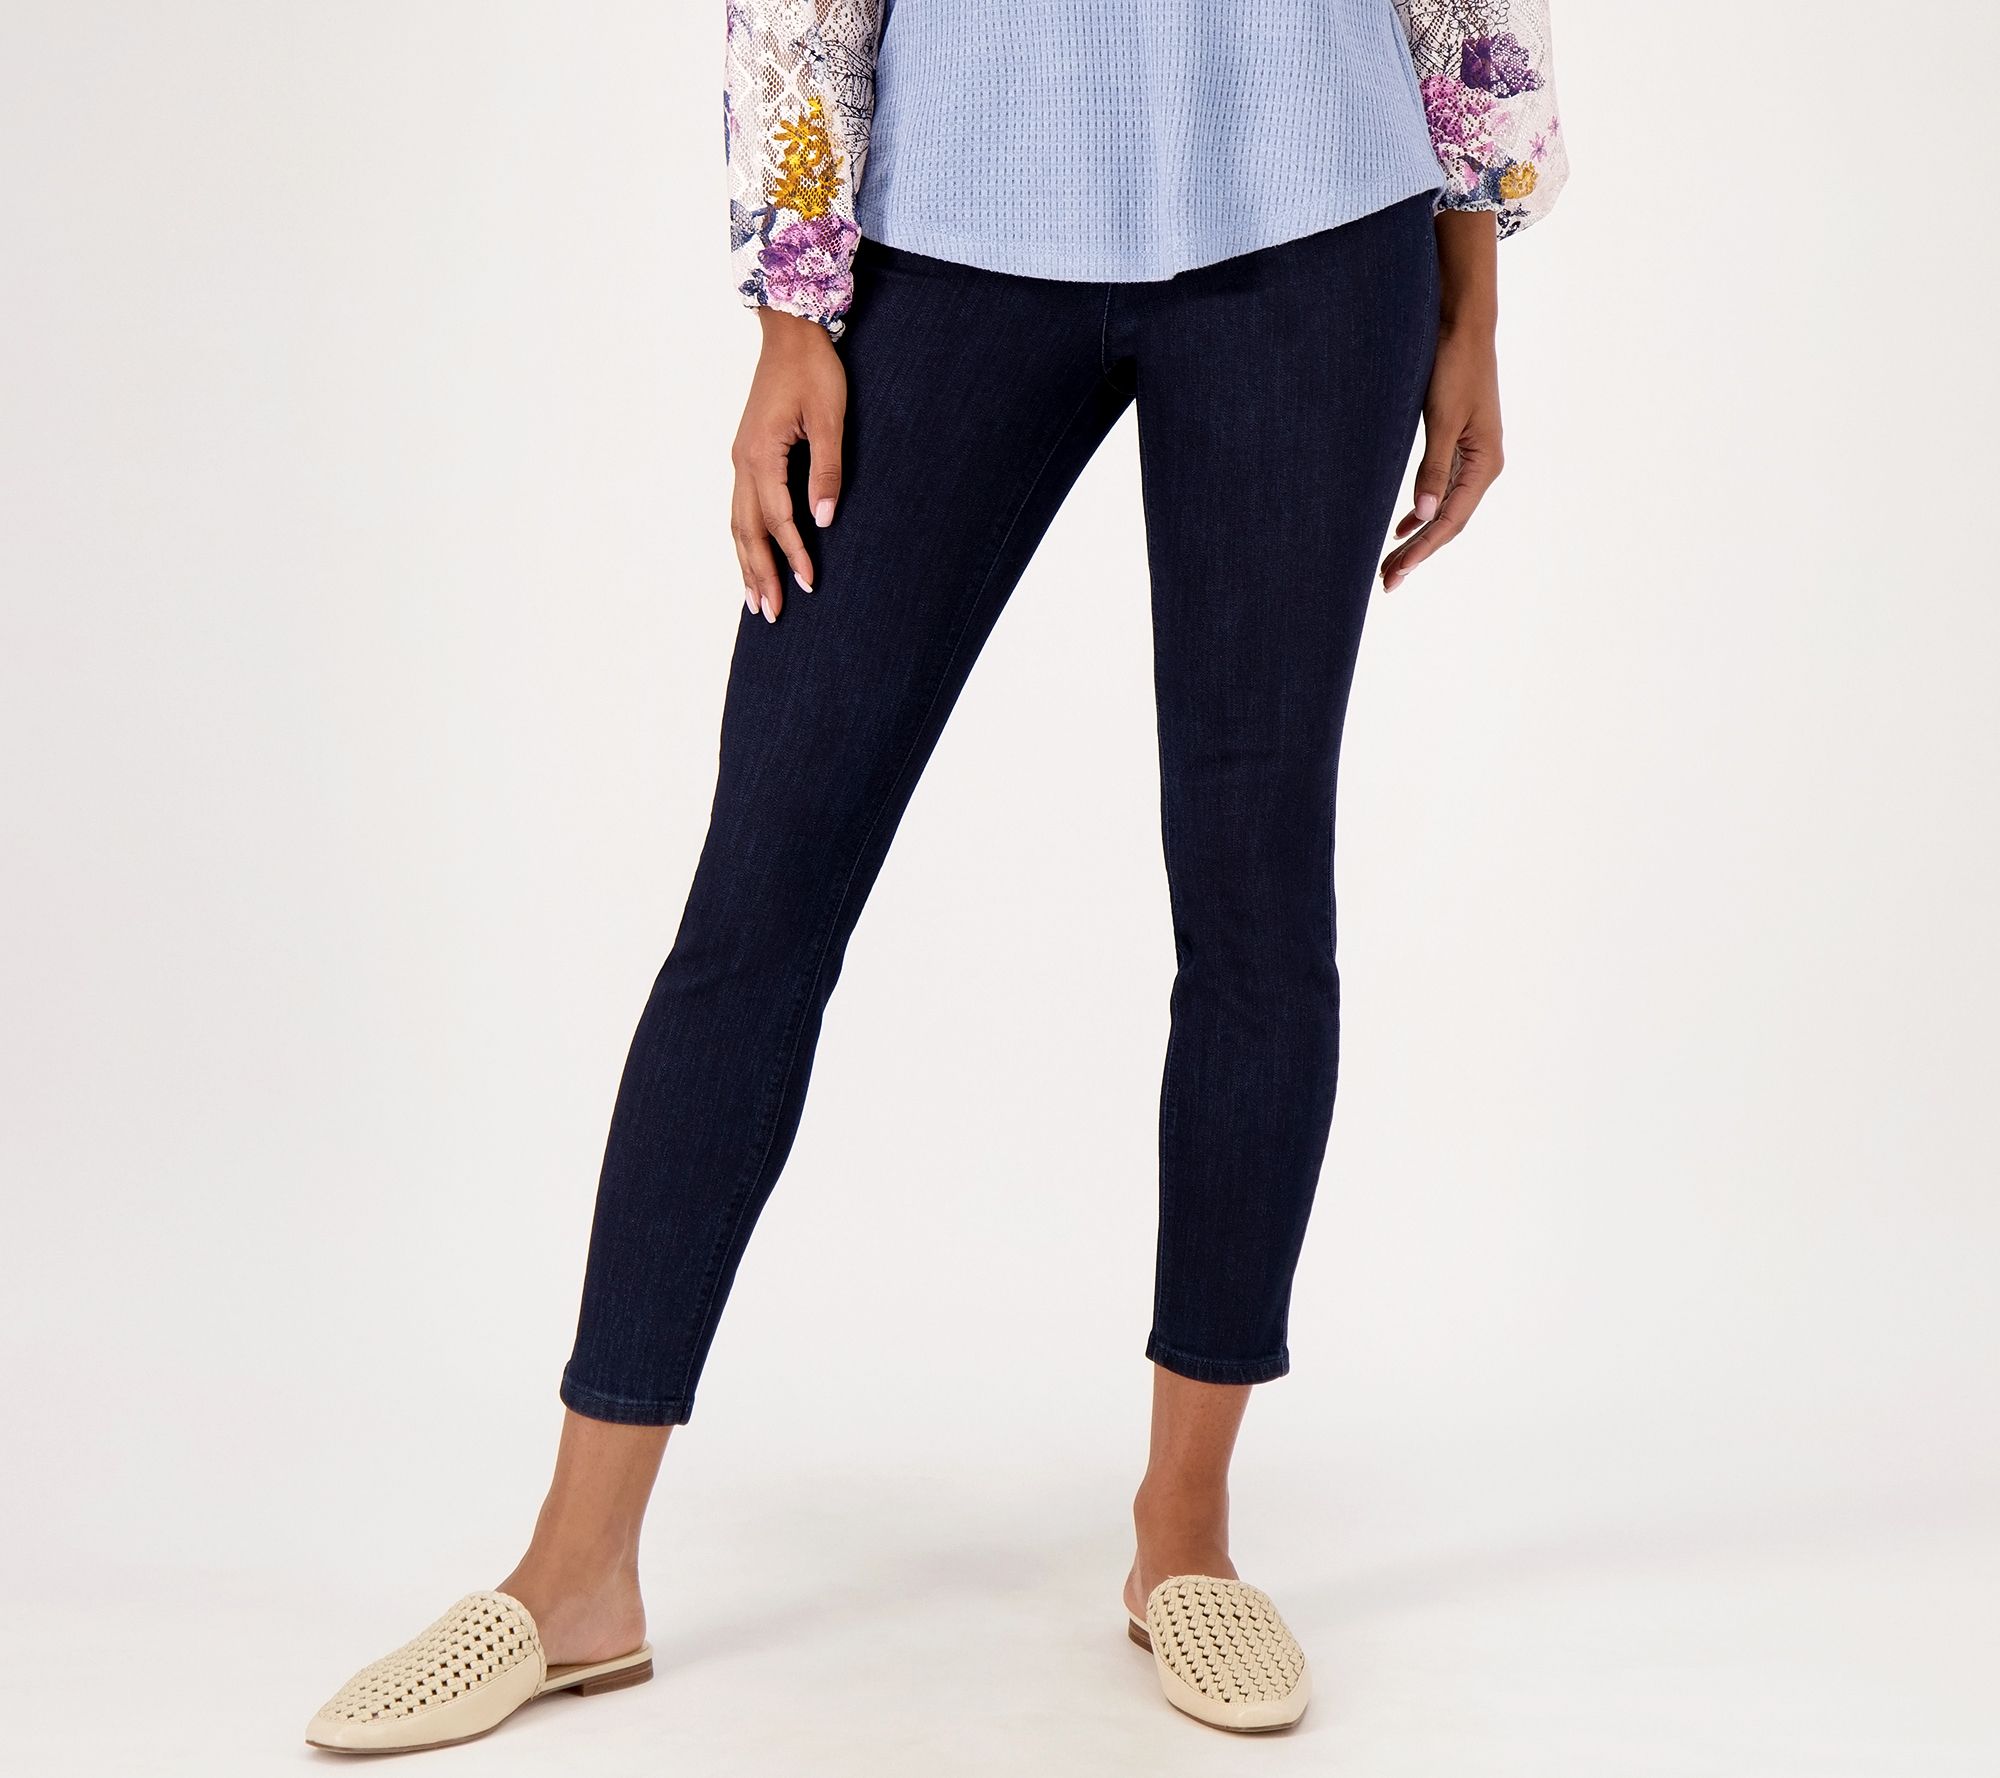 Review: Old Navy The Rock Star Jeggings - Stylish Petite